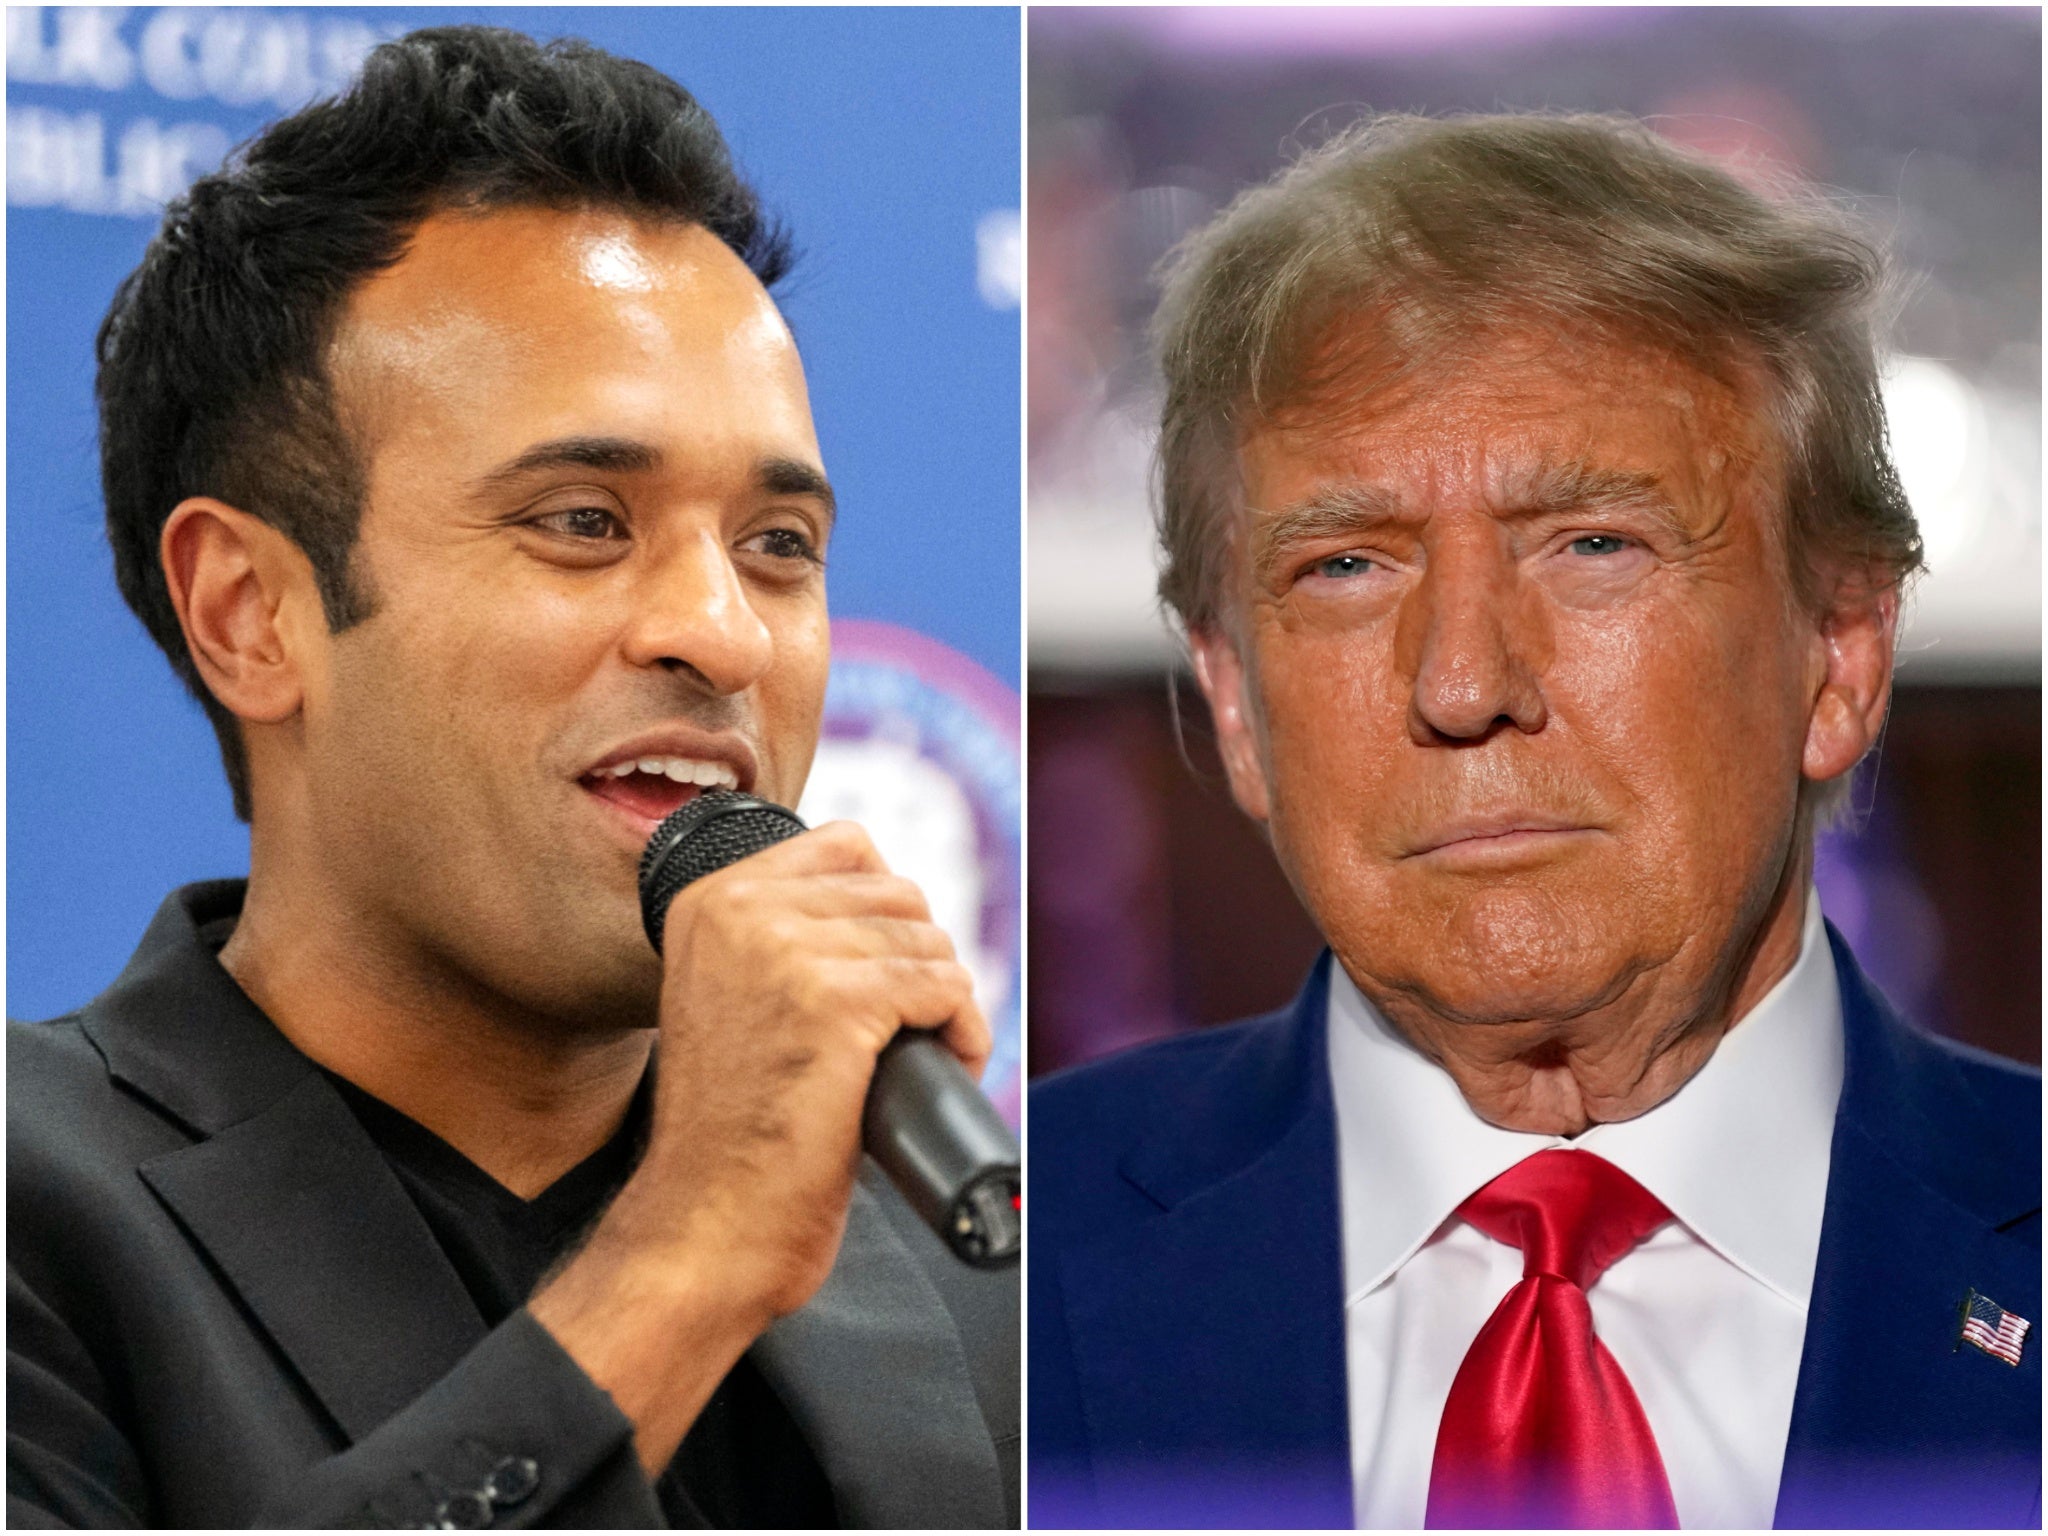 Donald Trump has said he’s open to having Vivek Ramaswamy as his running mate